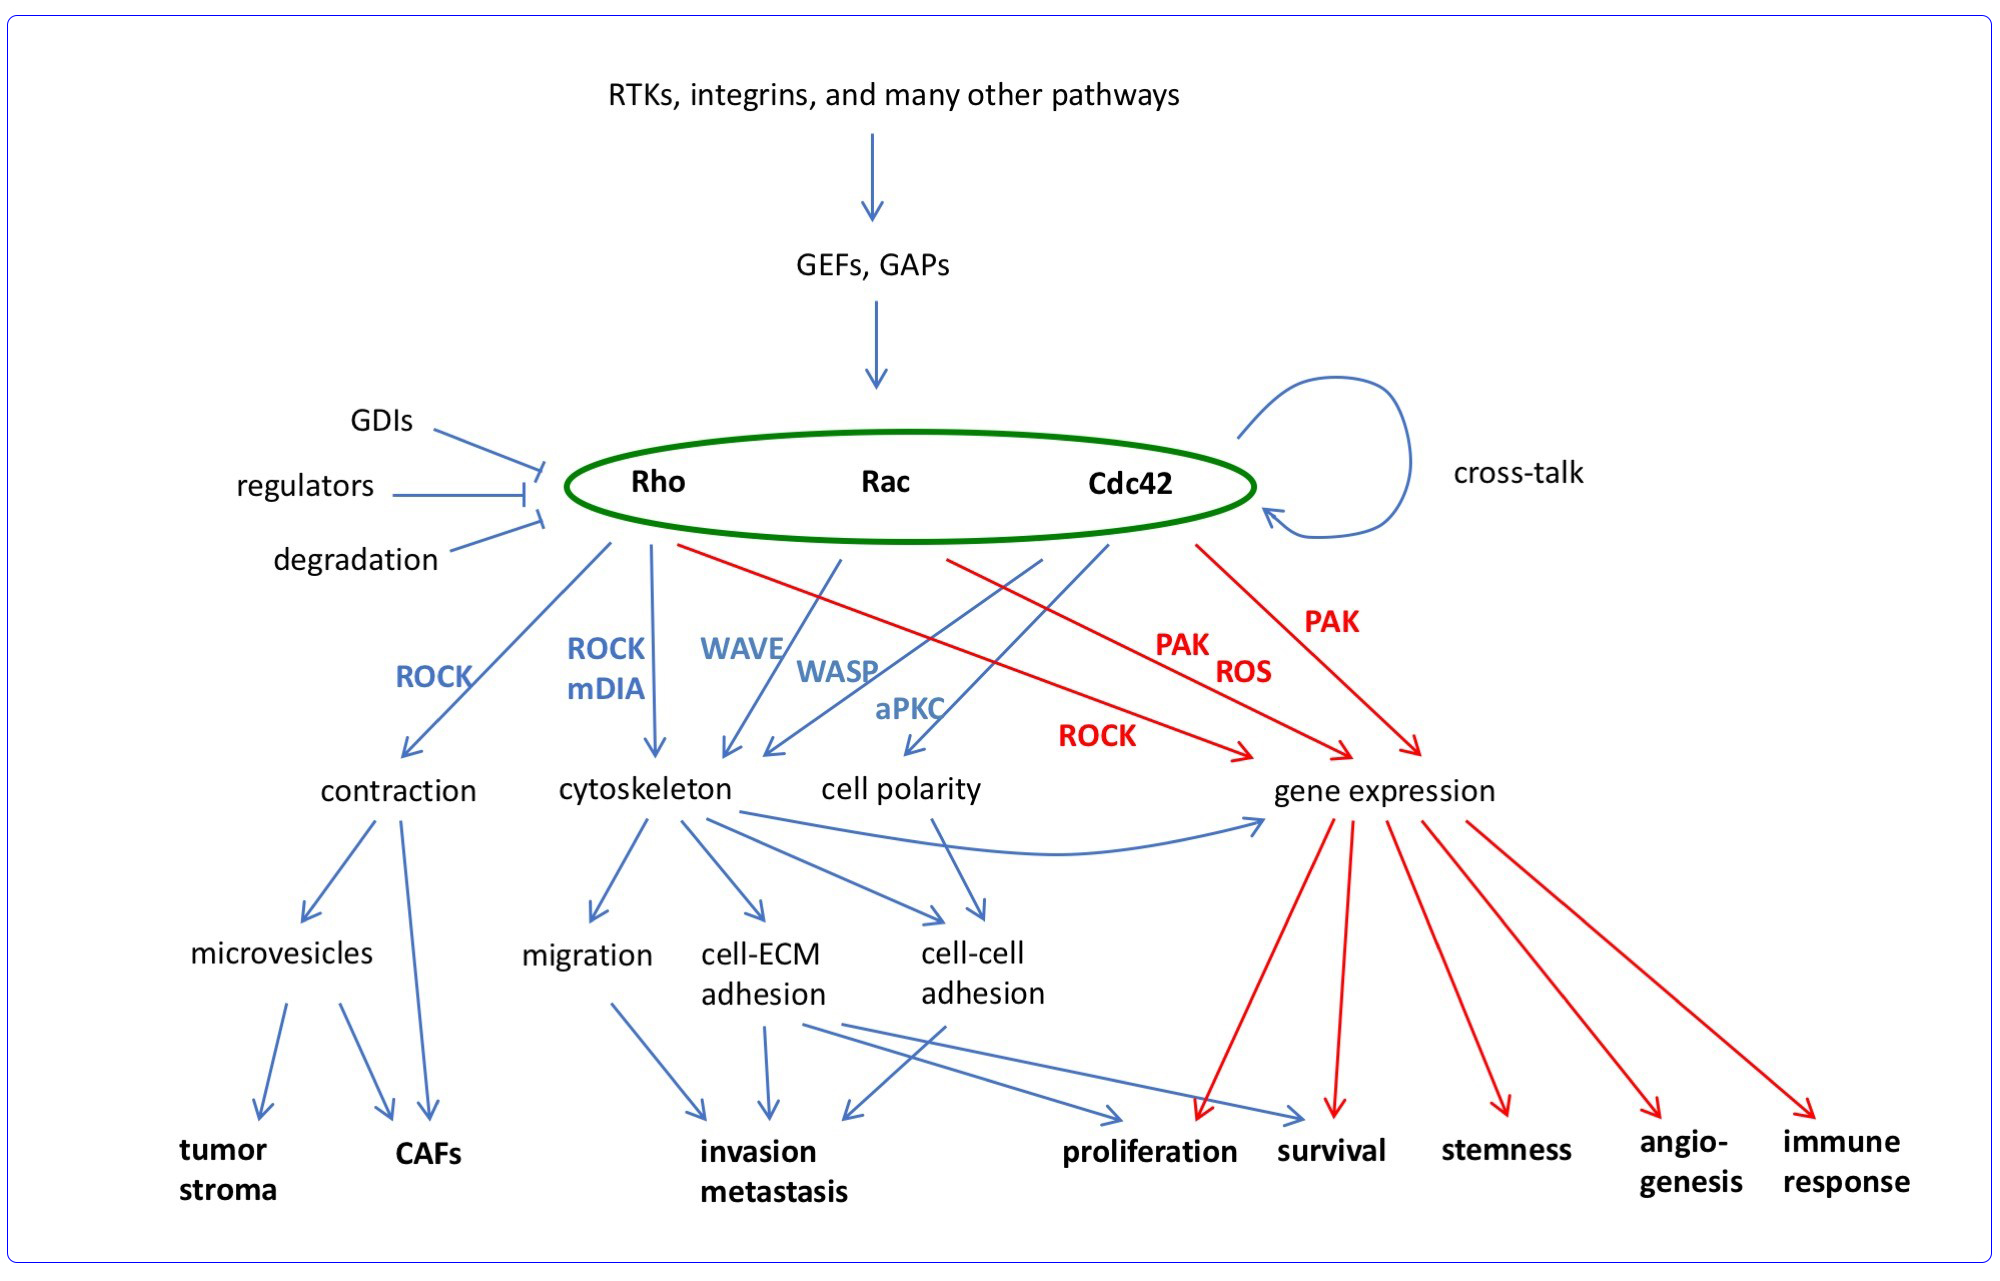 Overview of tumor relevant functions of Rho GTPases. Simplified scheme showing major regulation and effector pathways of Rho GTPases in cancer with a focus on Rho, Rac, and Cdc42. Important effector pathways are indicated beside the corresponding arrows. Rho GTPases regulate invasion and metastasis particularly by controlling cytoskeletal organization. Rho GTPase‐dependent gene expression controls stemness, angiogenesis, and immune response, while proliferation and survival are affected by cytoskeleton and gene expression. Rho‐dependent cell contraction is important for microvesicle and CAF formation (RTKs: receptor tyrosine kinases; ROS: reactive oxygen species; CAF: cancer associated fibroblasts).